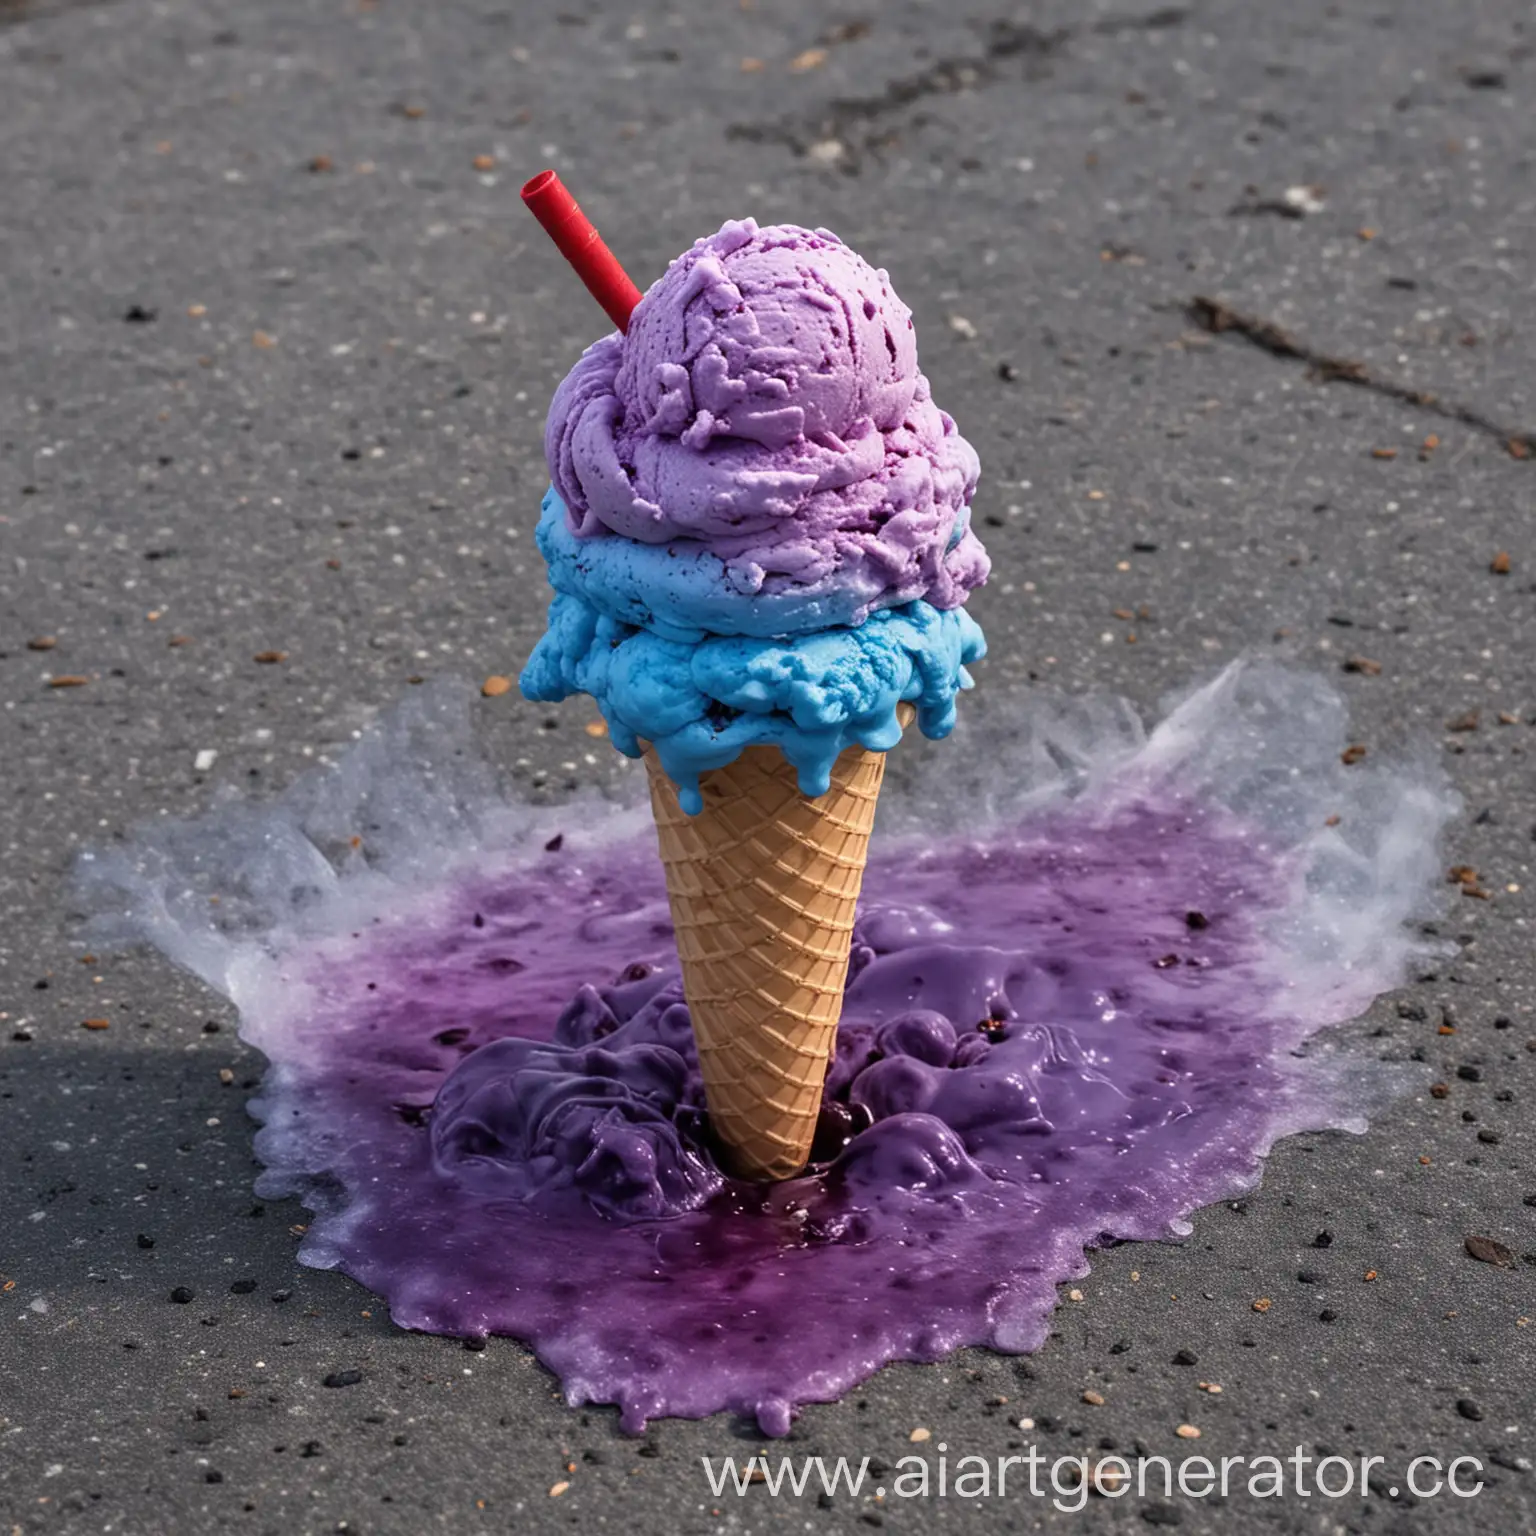 ColorChanging-Magical-Ice-Cream-Blue-to-Purple-Delight